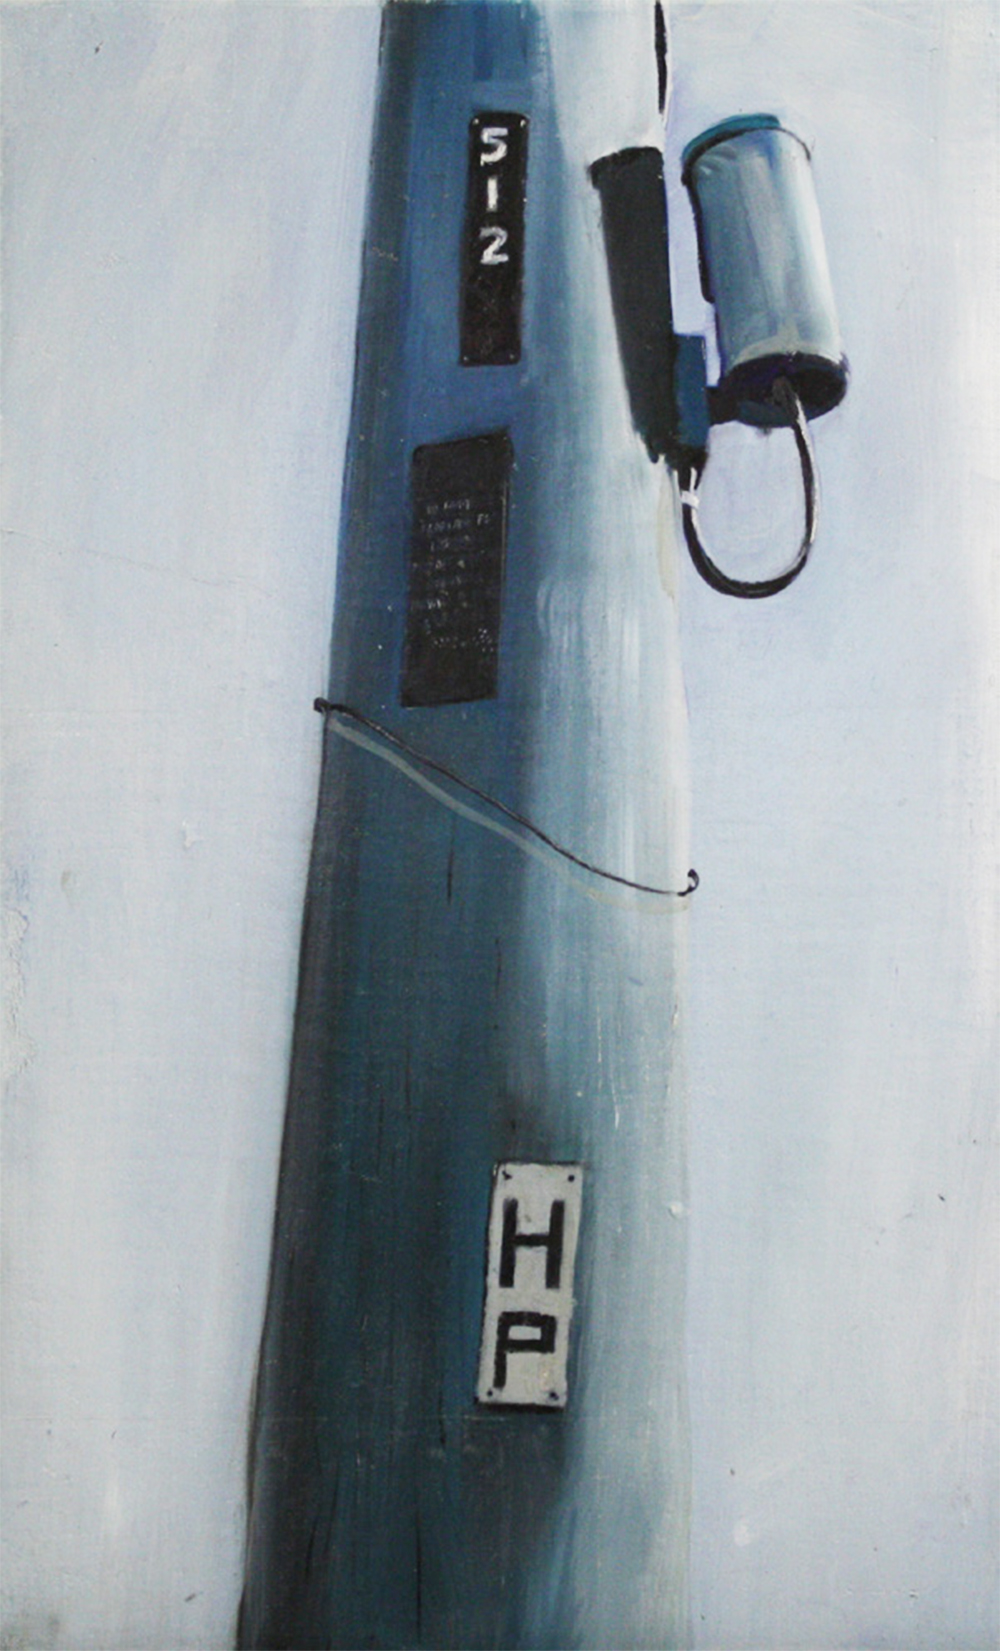   Stand Alone:   512   2011, oil on canvas on hardboard  50 x 76 cm         